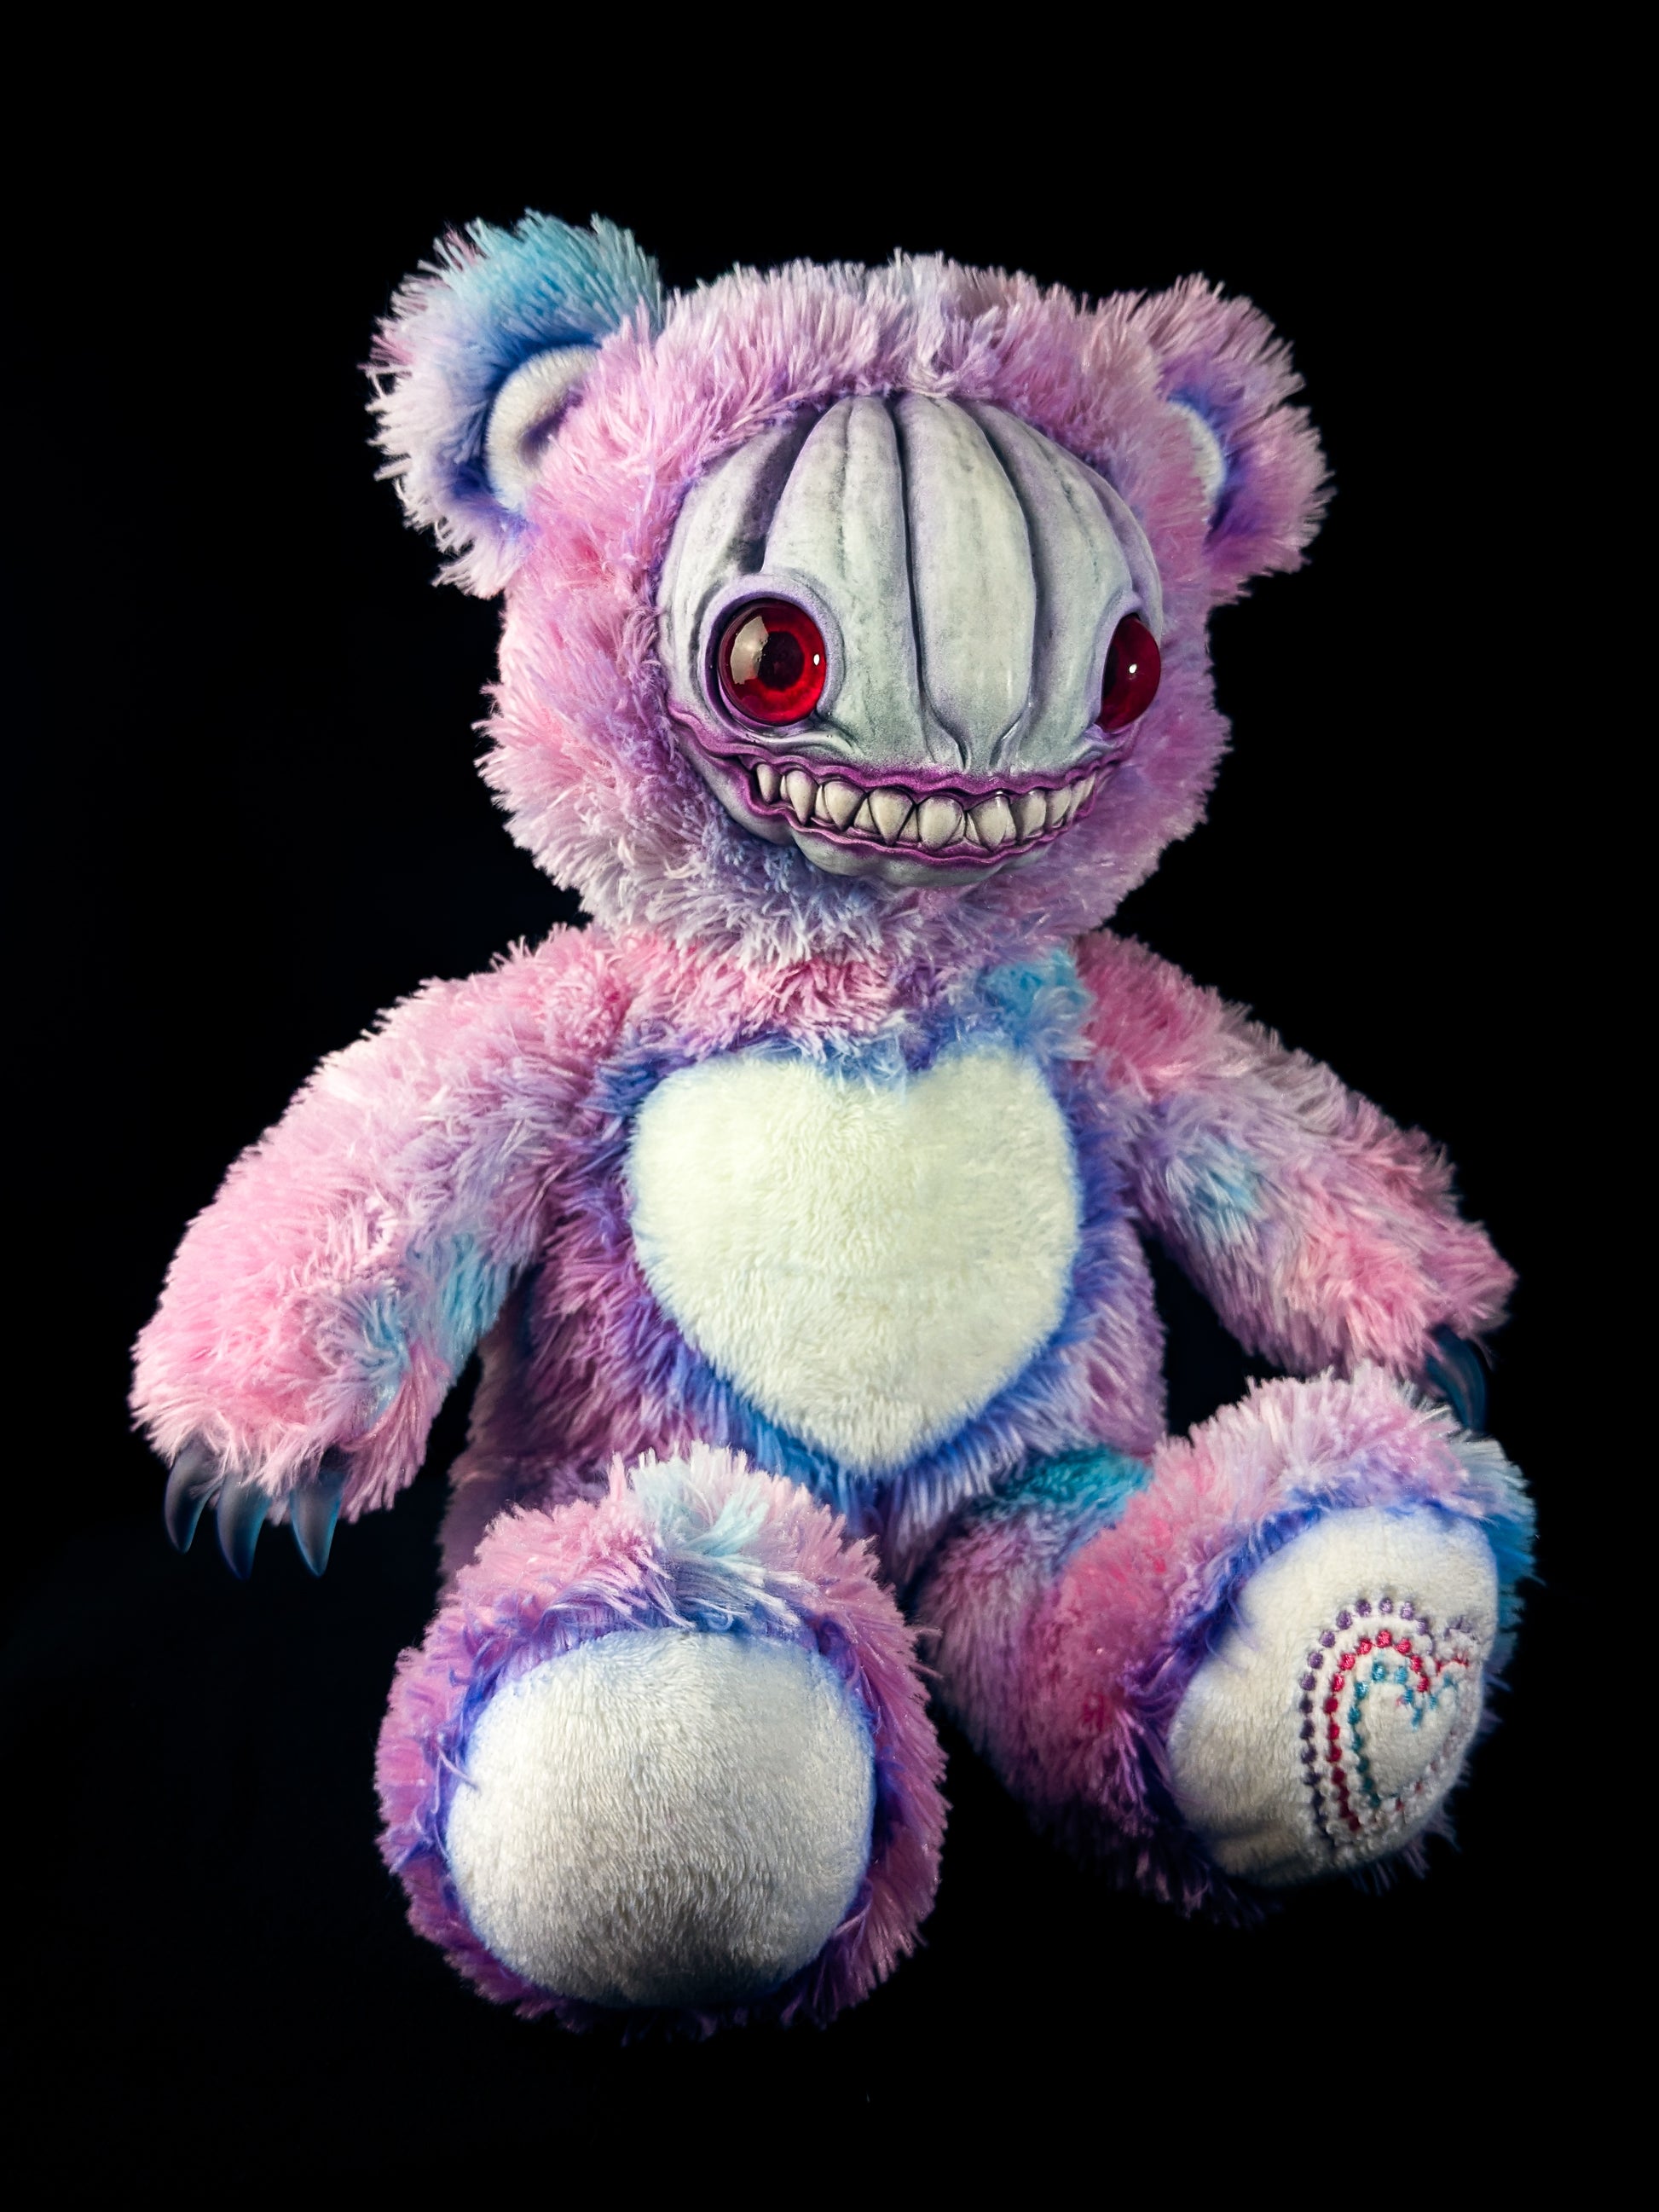 Cosmic Rot: HAUNTVESTER - CRYPTCRITZ Handcrafted Creepy Cute Halloween Pumpkin Art Doll Plush Toy for Spooky Souls